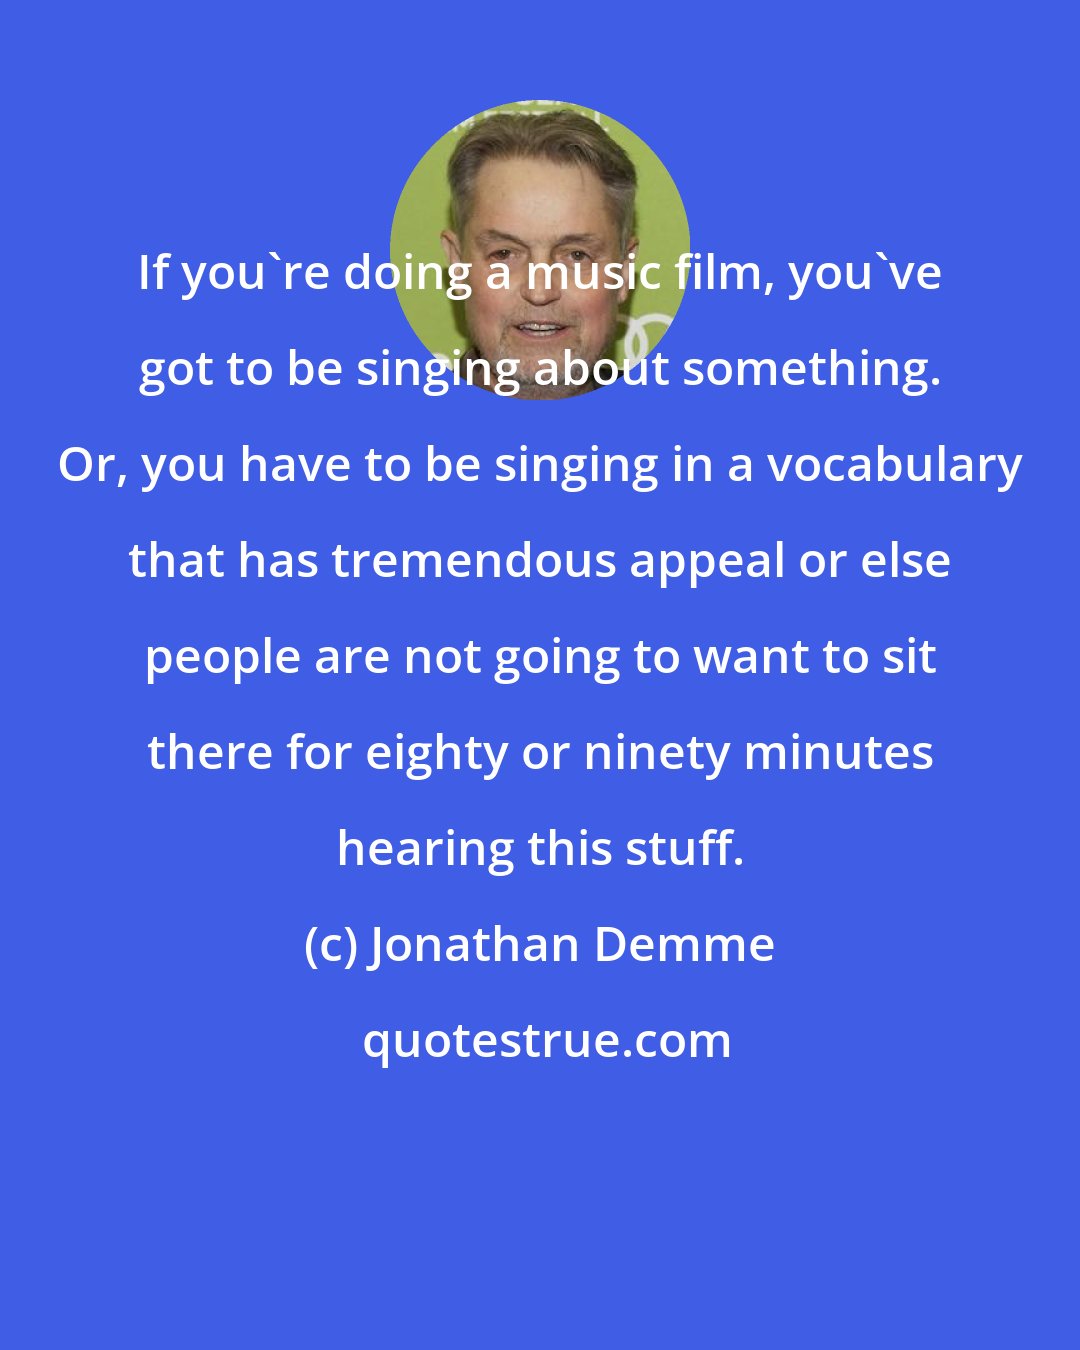 Jonathan Demme: If you're doing a music film, you've got to be singing about something. Or, you have to be singing in a vocabulary that has tremendous appeal or else people are not going to want to sit there for eighty or ninety minutes hearing this stuff.